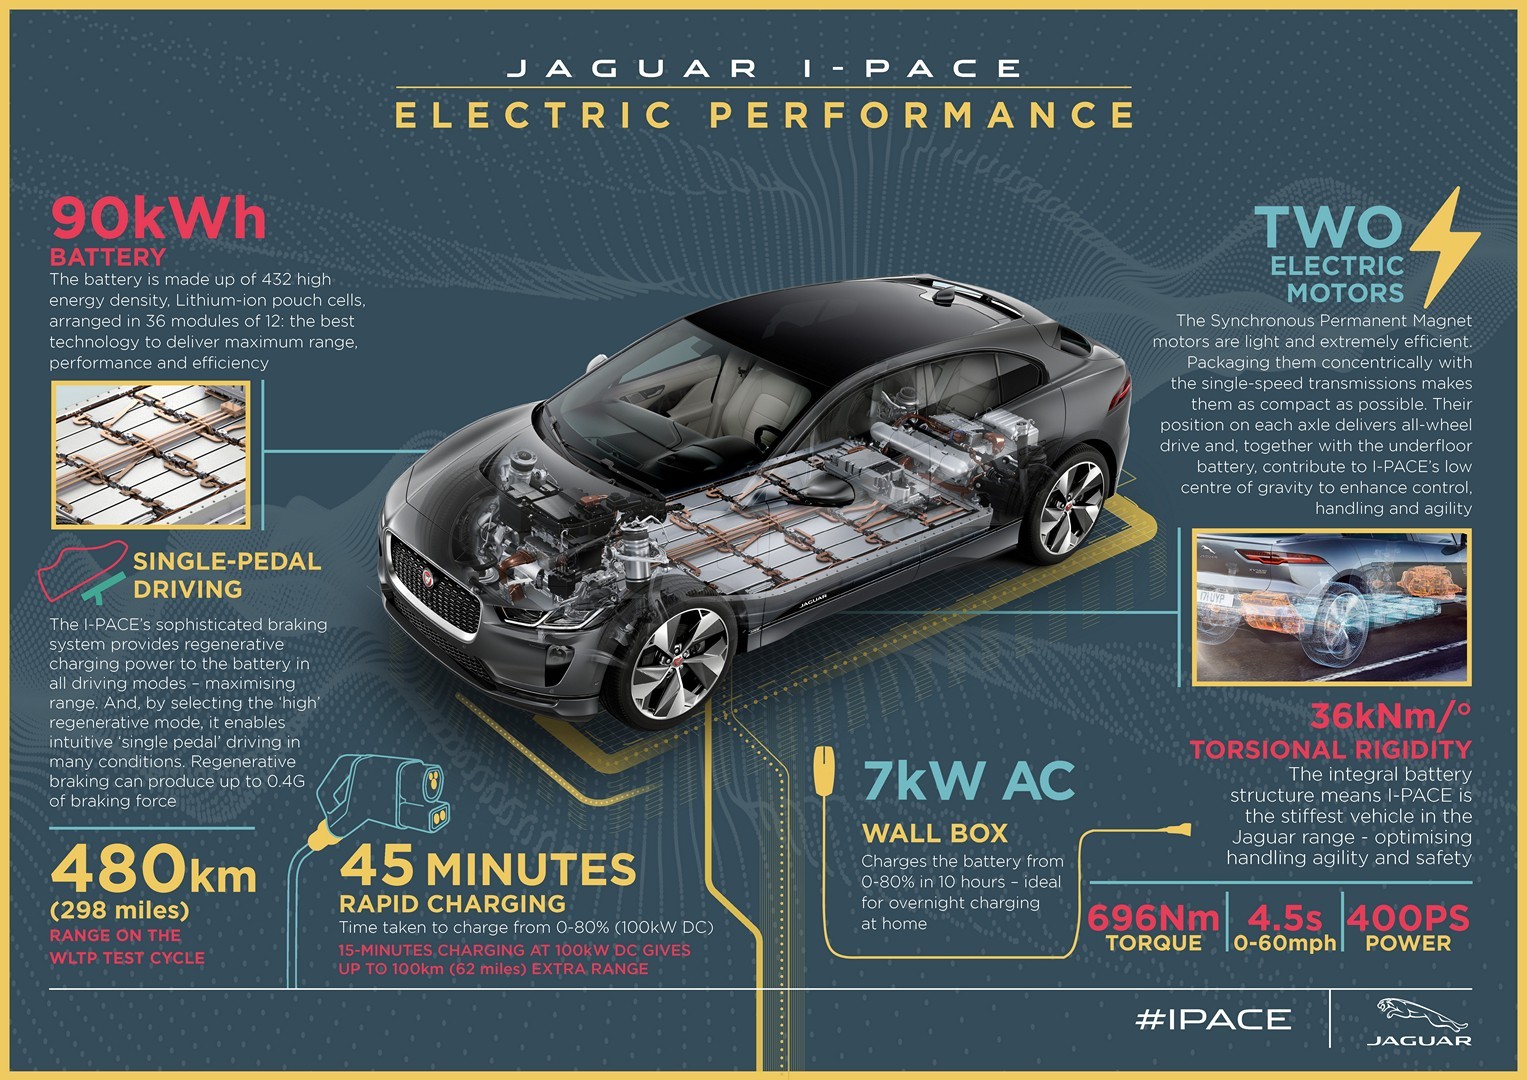 https://s1.cdn.autoevolution.com/images/news/gallery/2020-jaguar-i-pace-update-offers-234-miles-of-range-thanks-to-etrophy-know-how_69.jpg